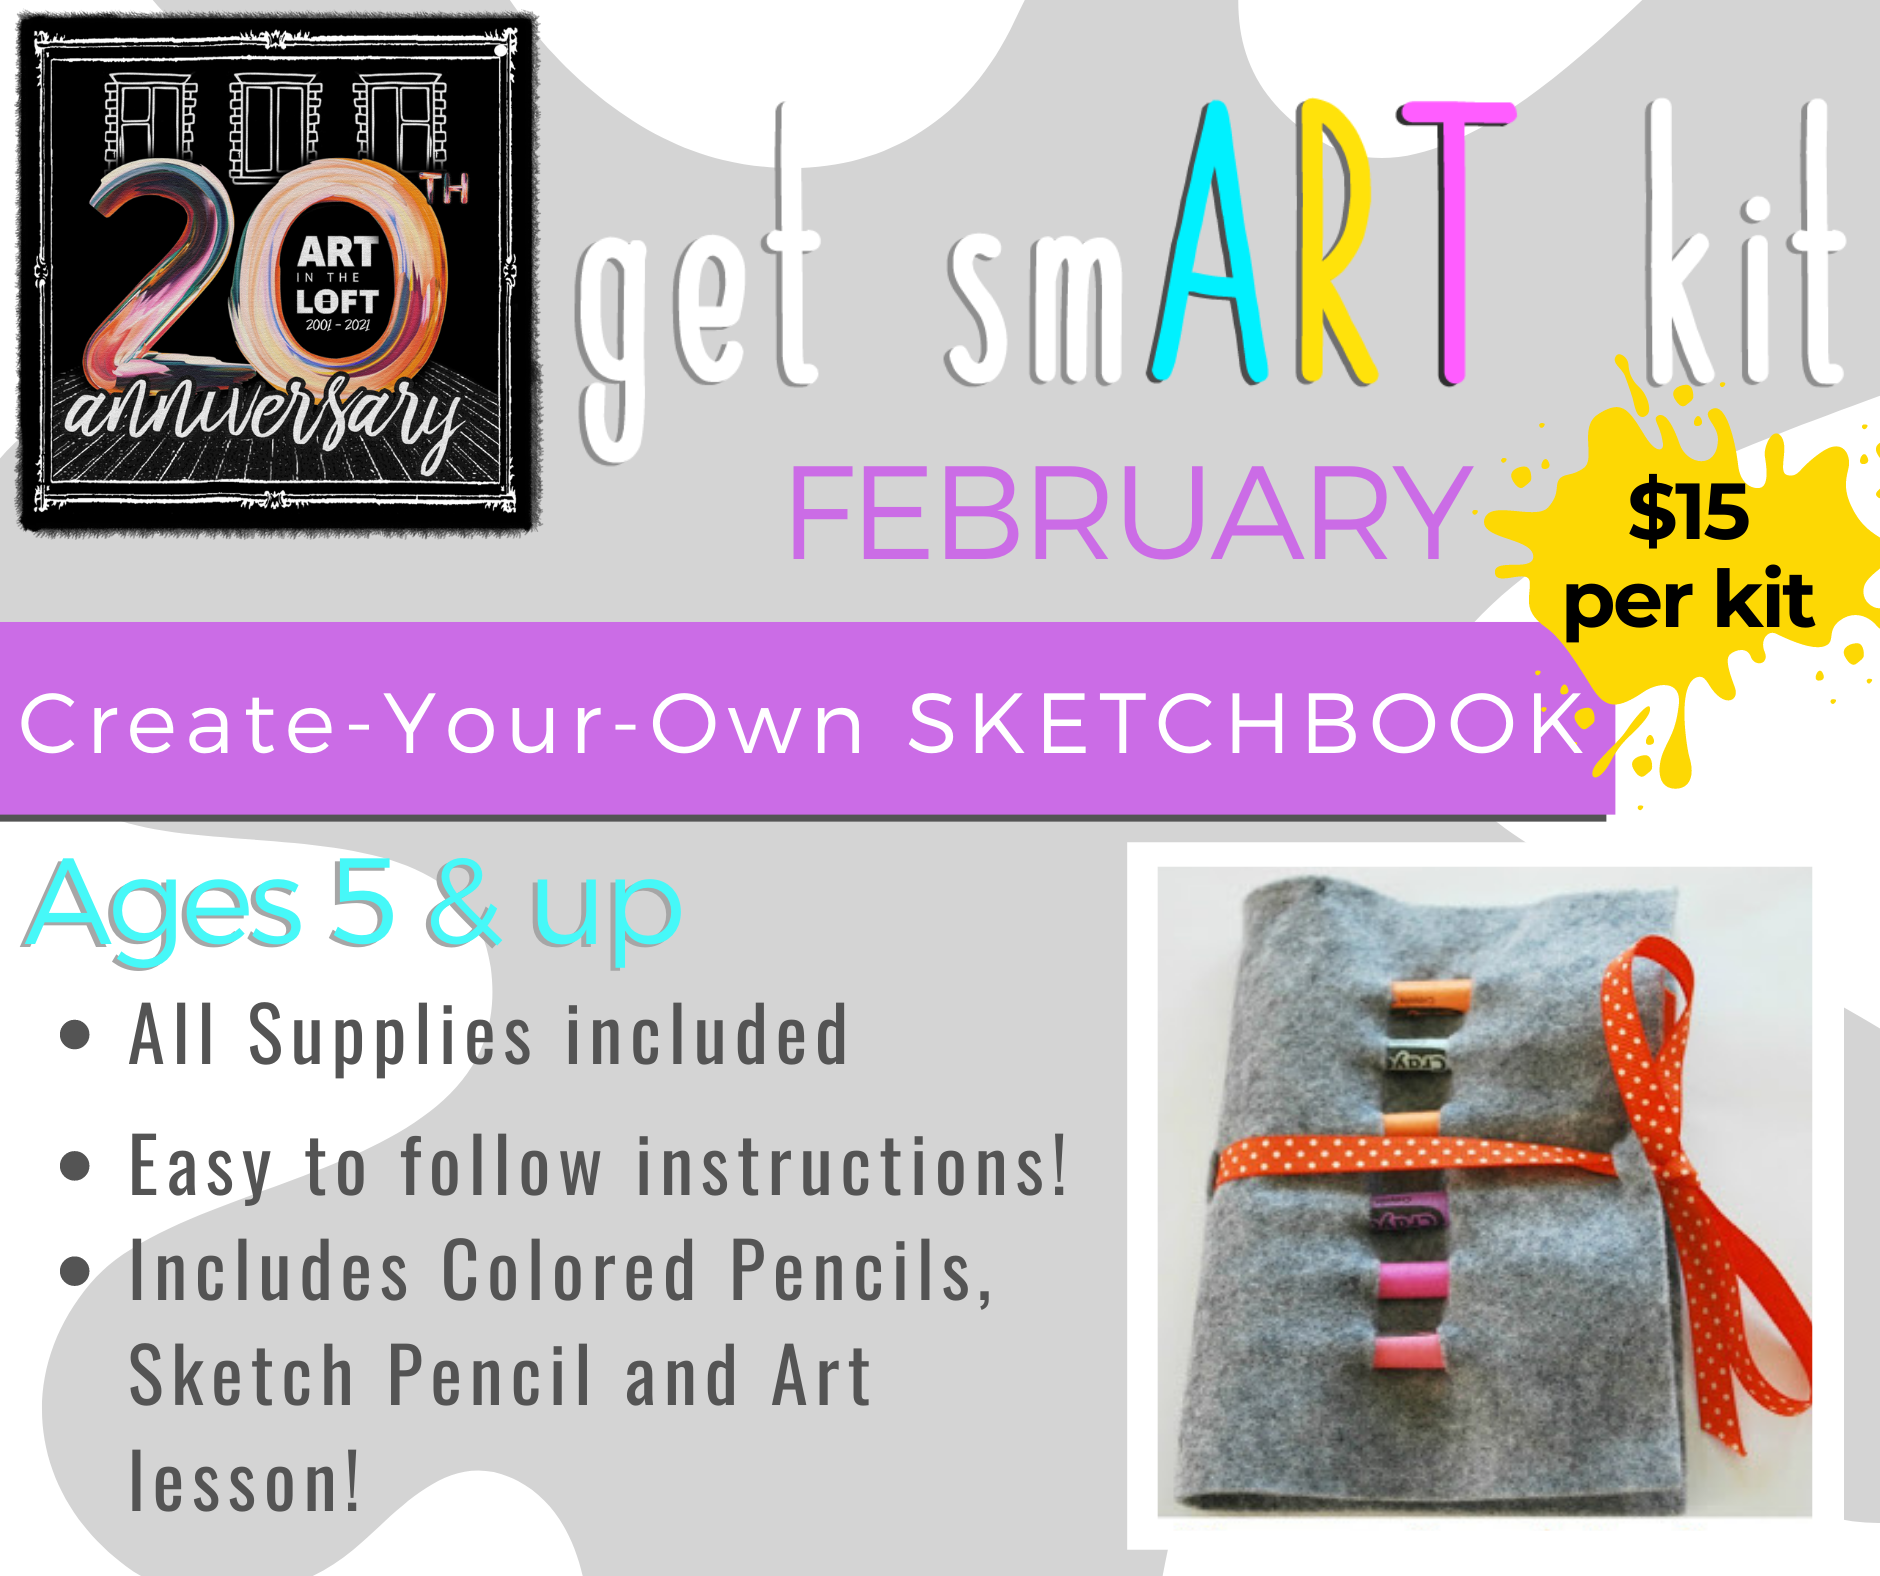 Get smART Kit FEBRUARY: Create-Your-Own Sketchbook